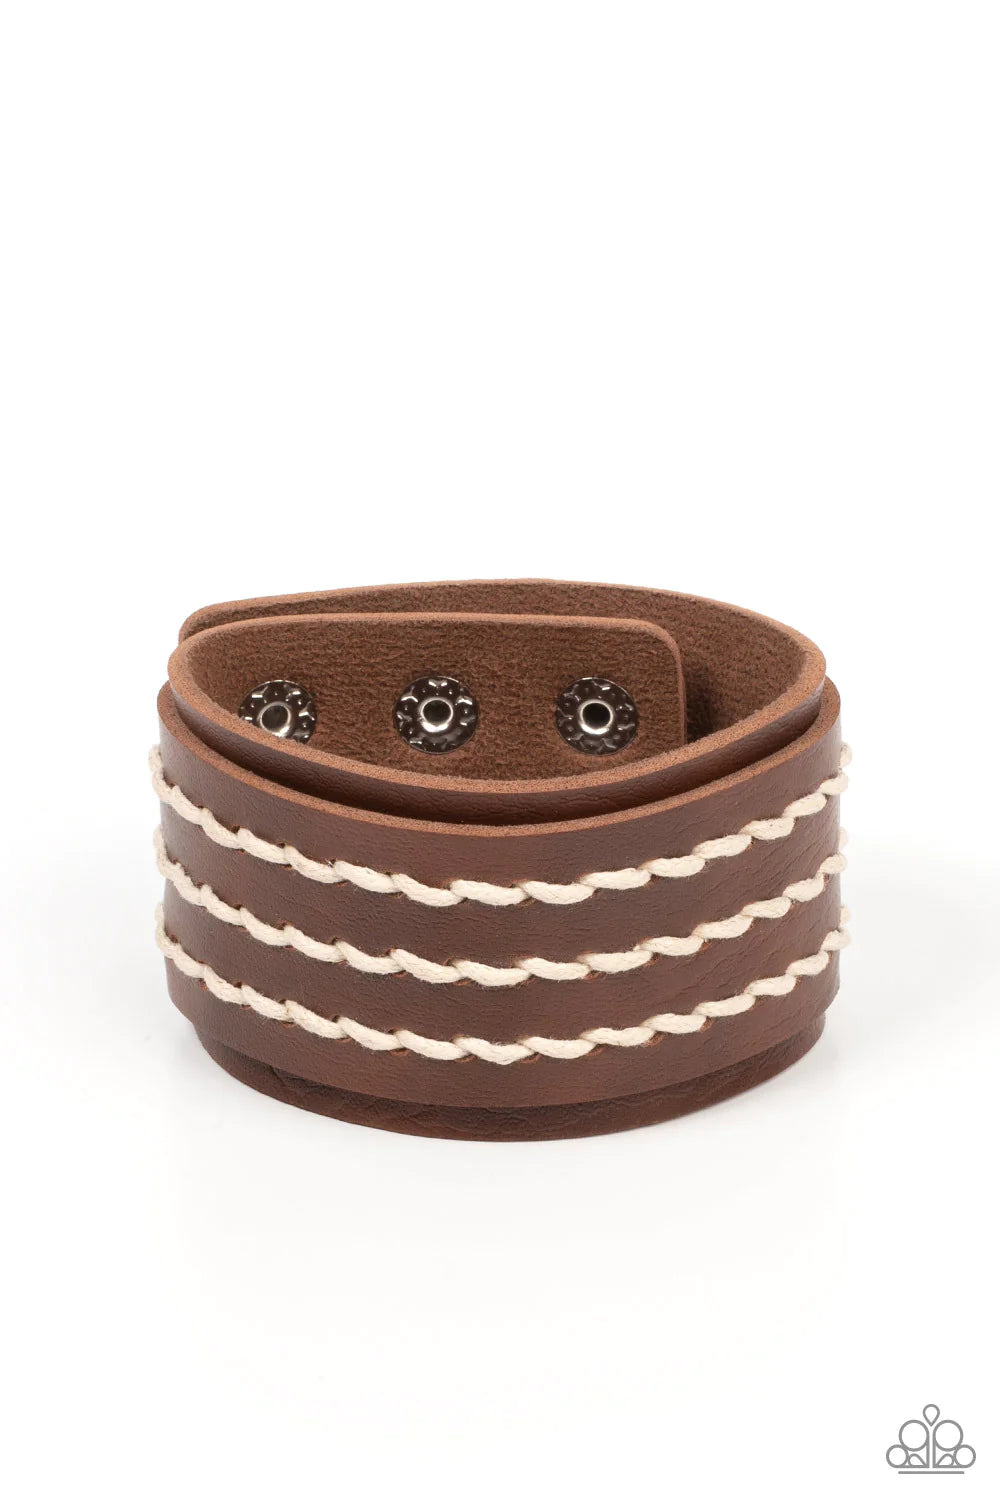 Real Ranchero - Brown Urban Leather Bracelet - Paparazzi Accessories - Three rows of white cording are laced down the center of a brown leather band that is studded in place across the front of a thick leather band, resulting in a rustic flair around the wrist. 